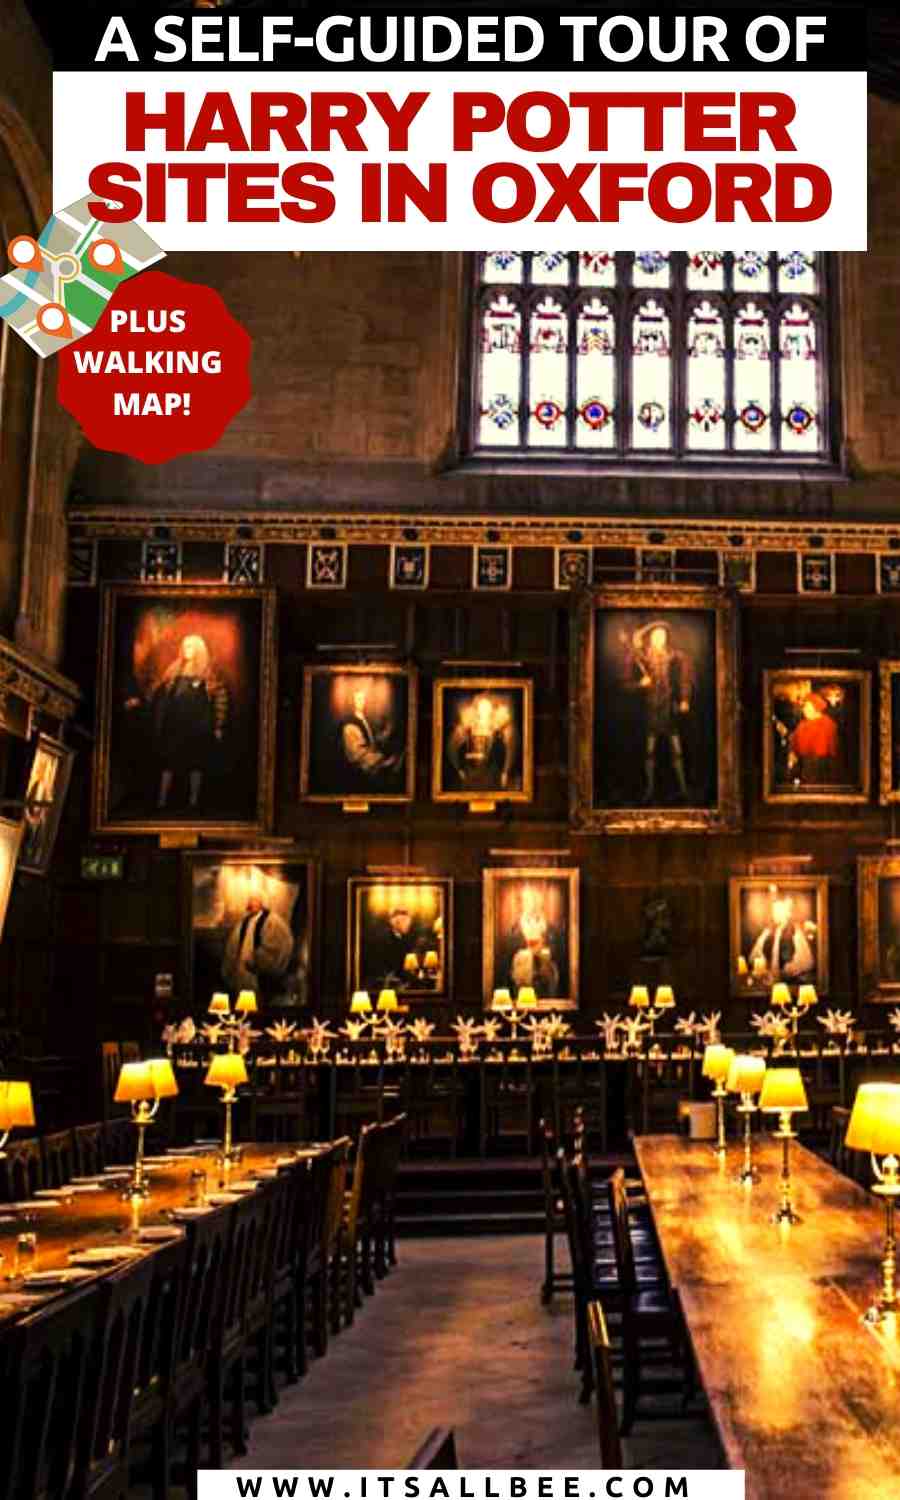 Harry Potter filming in Oxford | Harry Potter Oxford locations